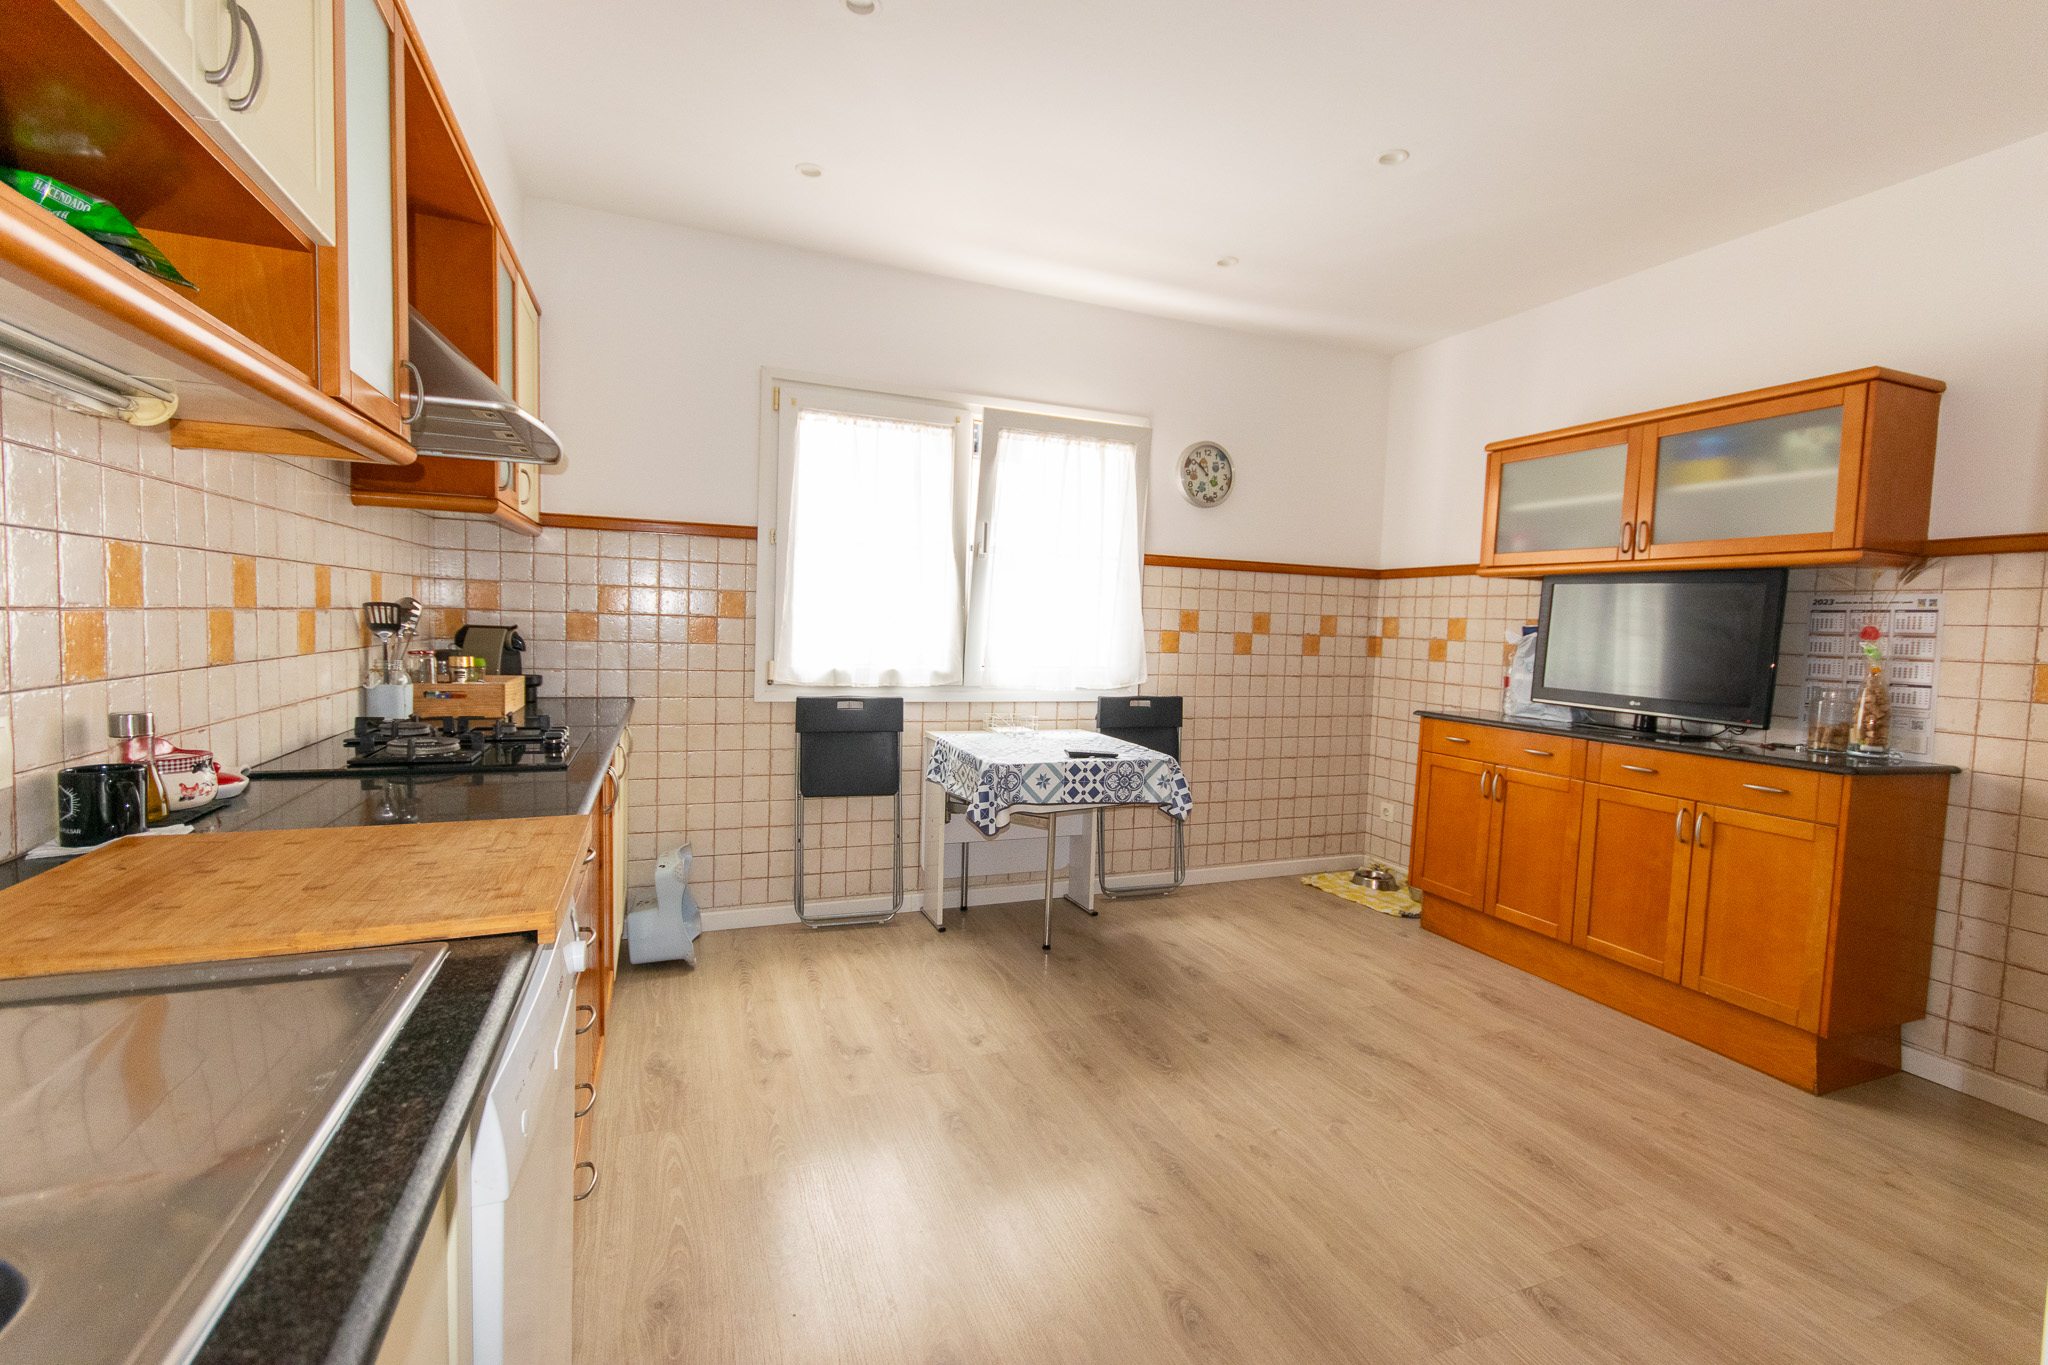 Duplex kitchen with large terrace in Mercadal